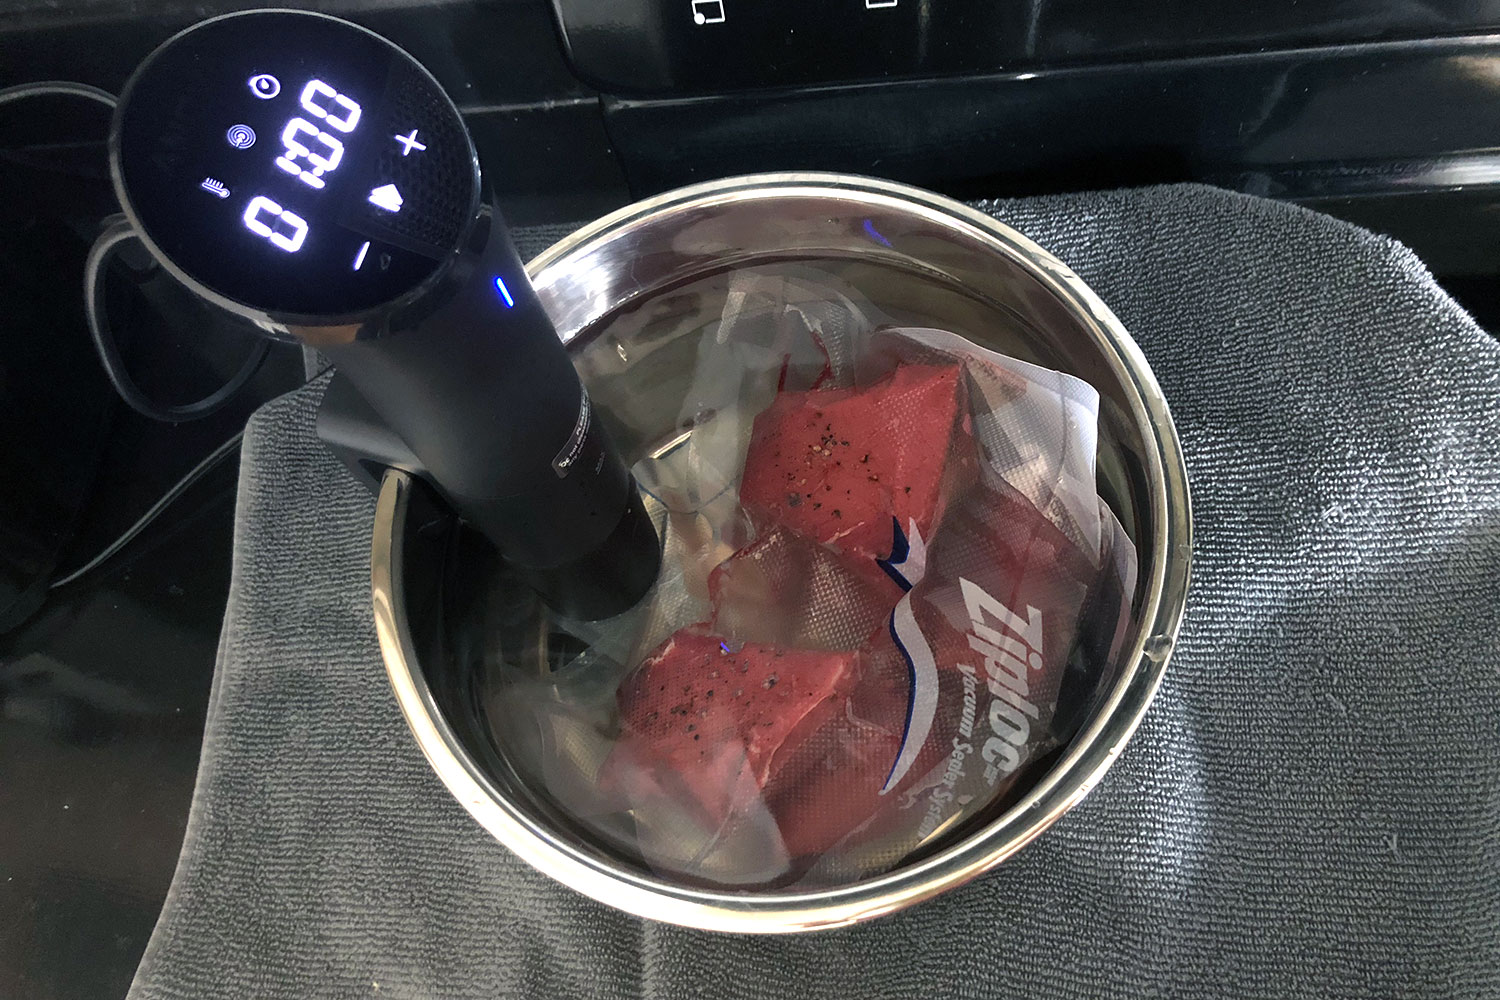 The pink stuff in a tub works very well for cleaning the Anova